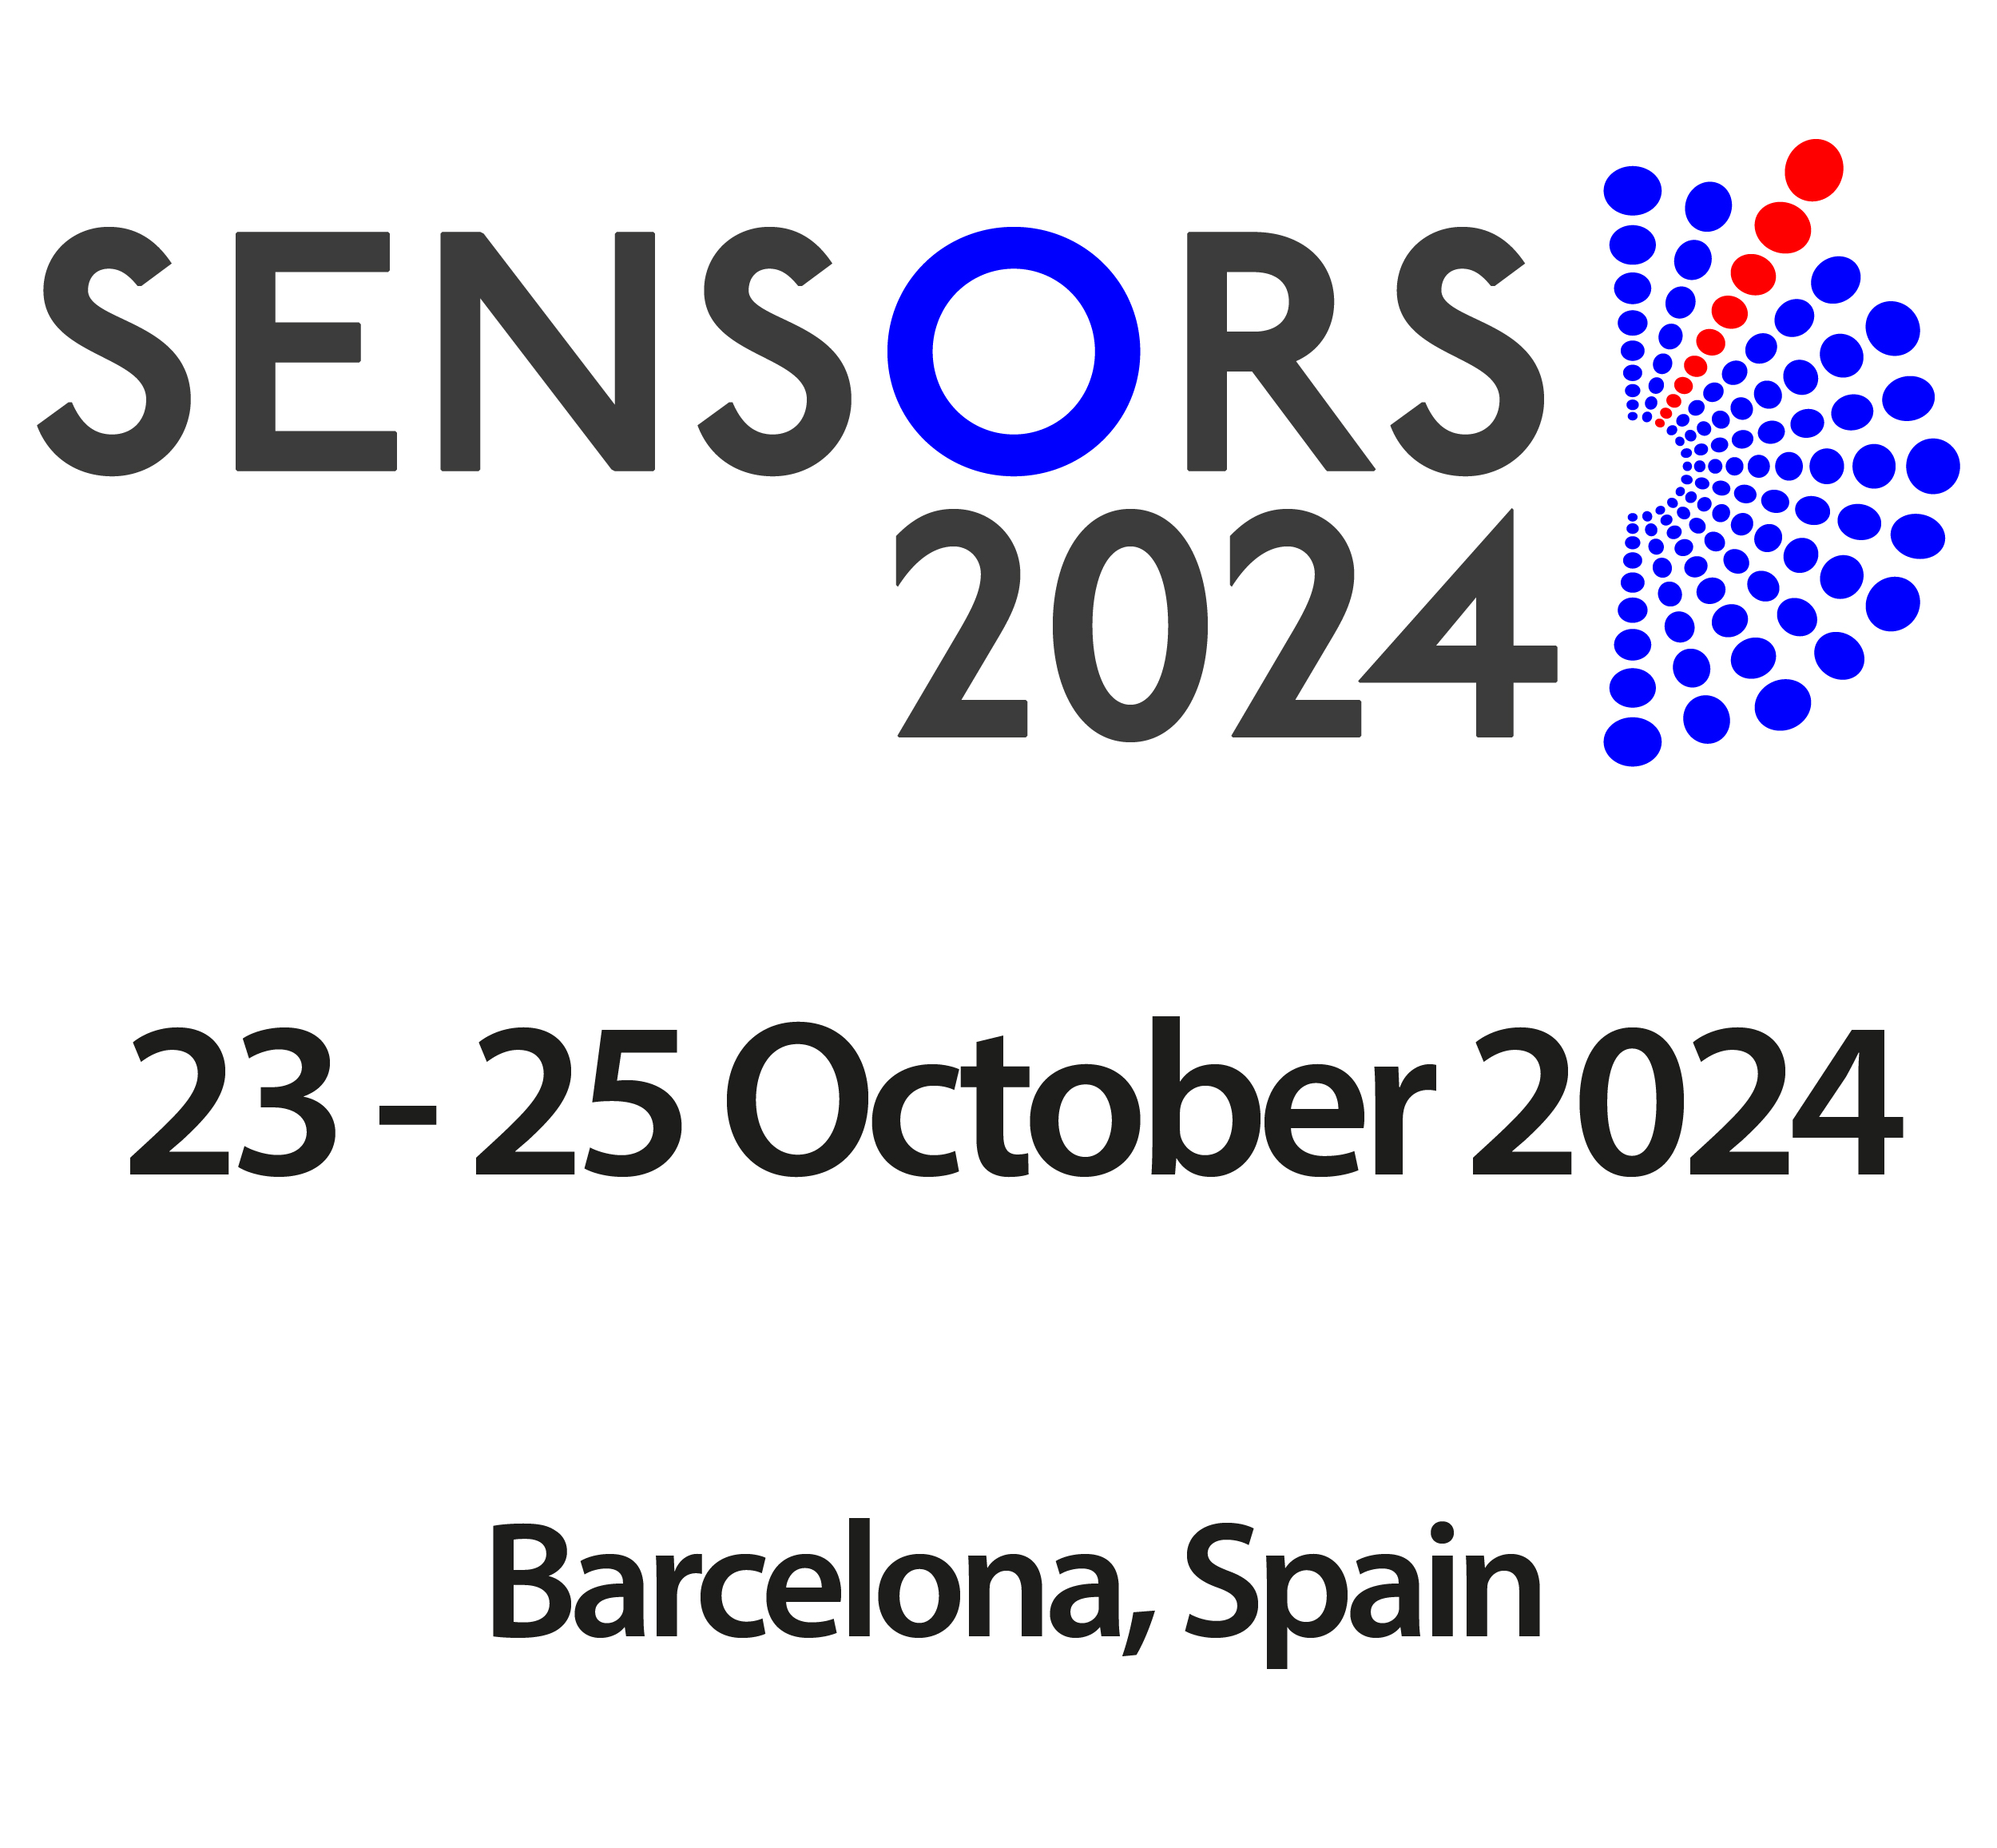 The 4th edition of the Sensors Technologies International conference - Sensors 2024